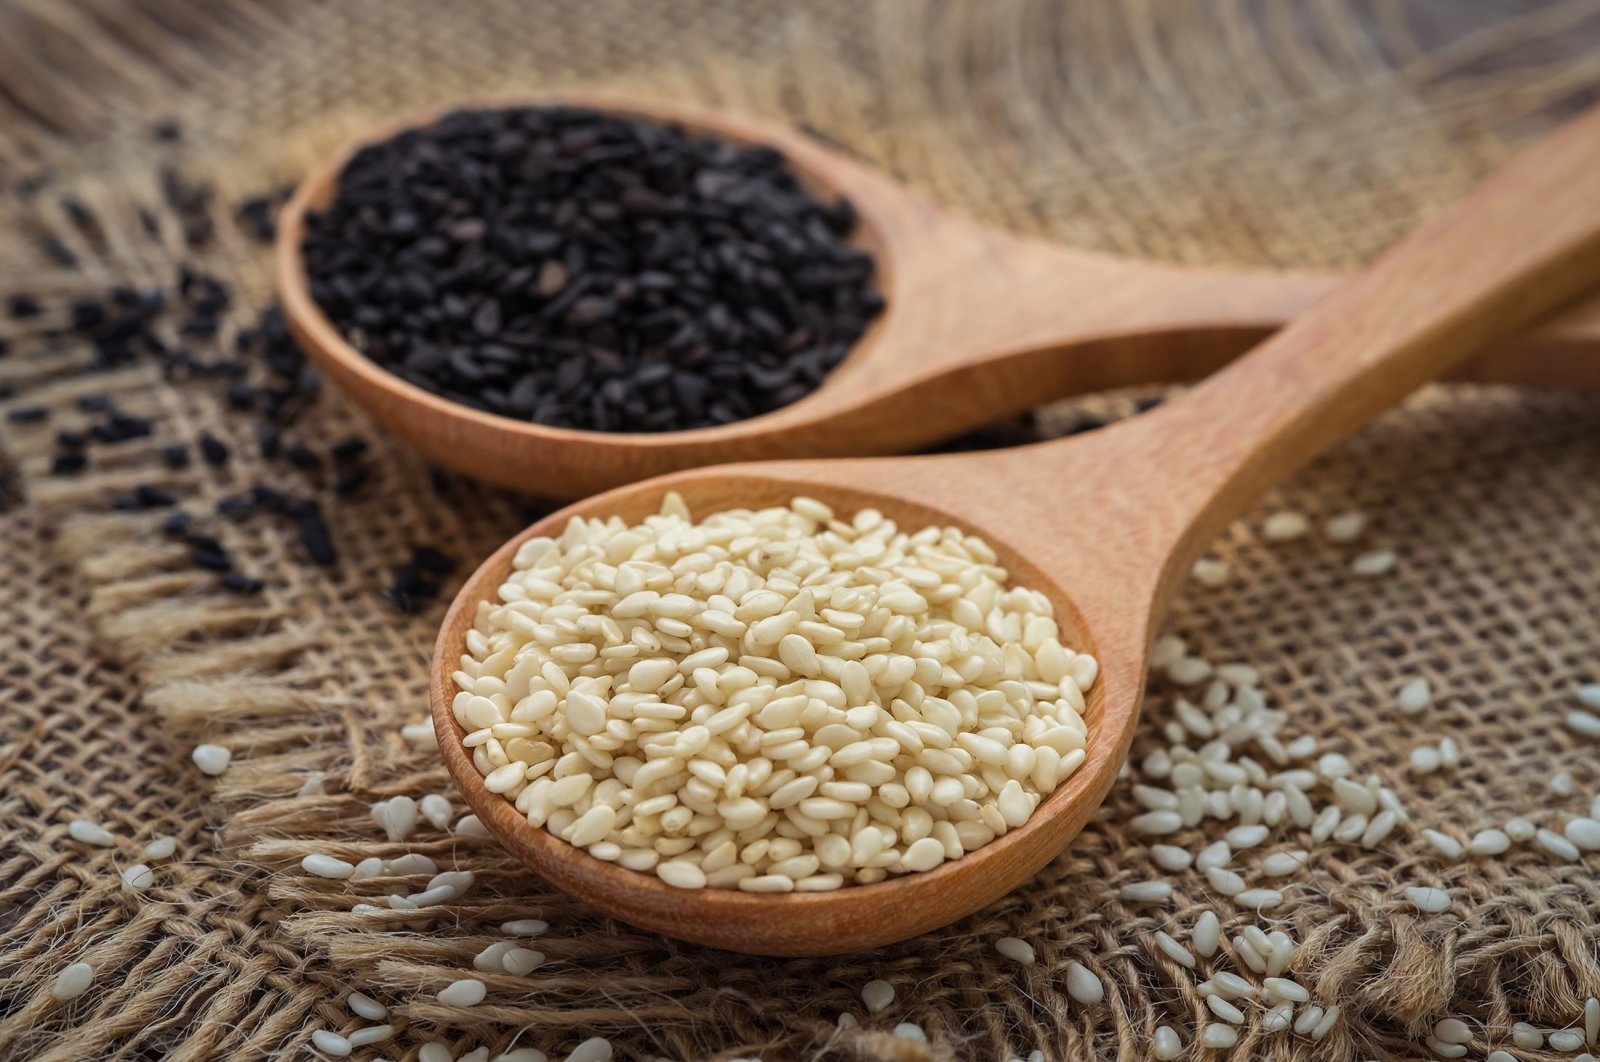 White and black sesame seeds. (Shutterstock Photo)